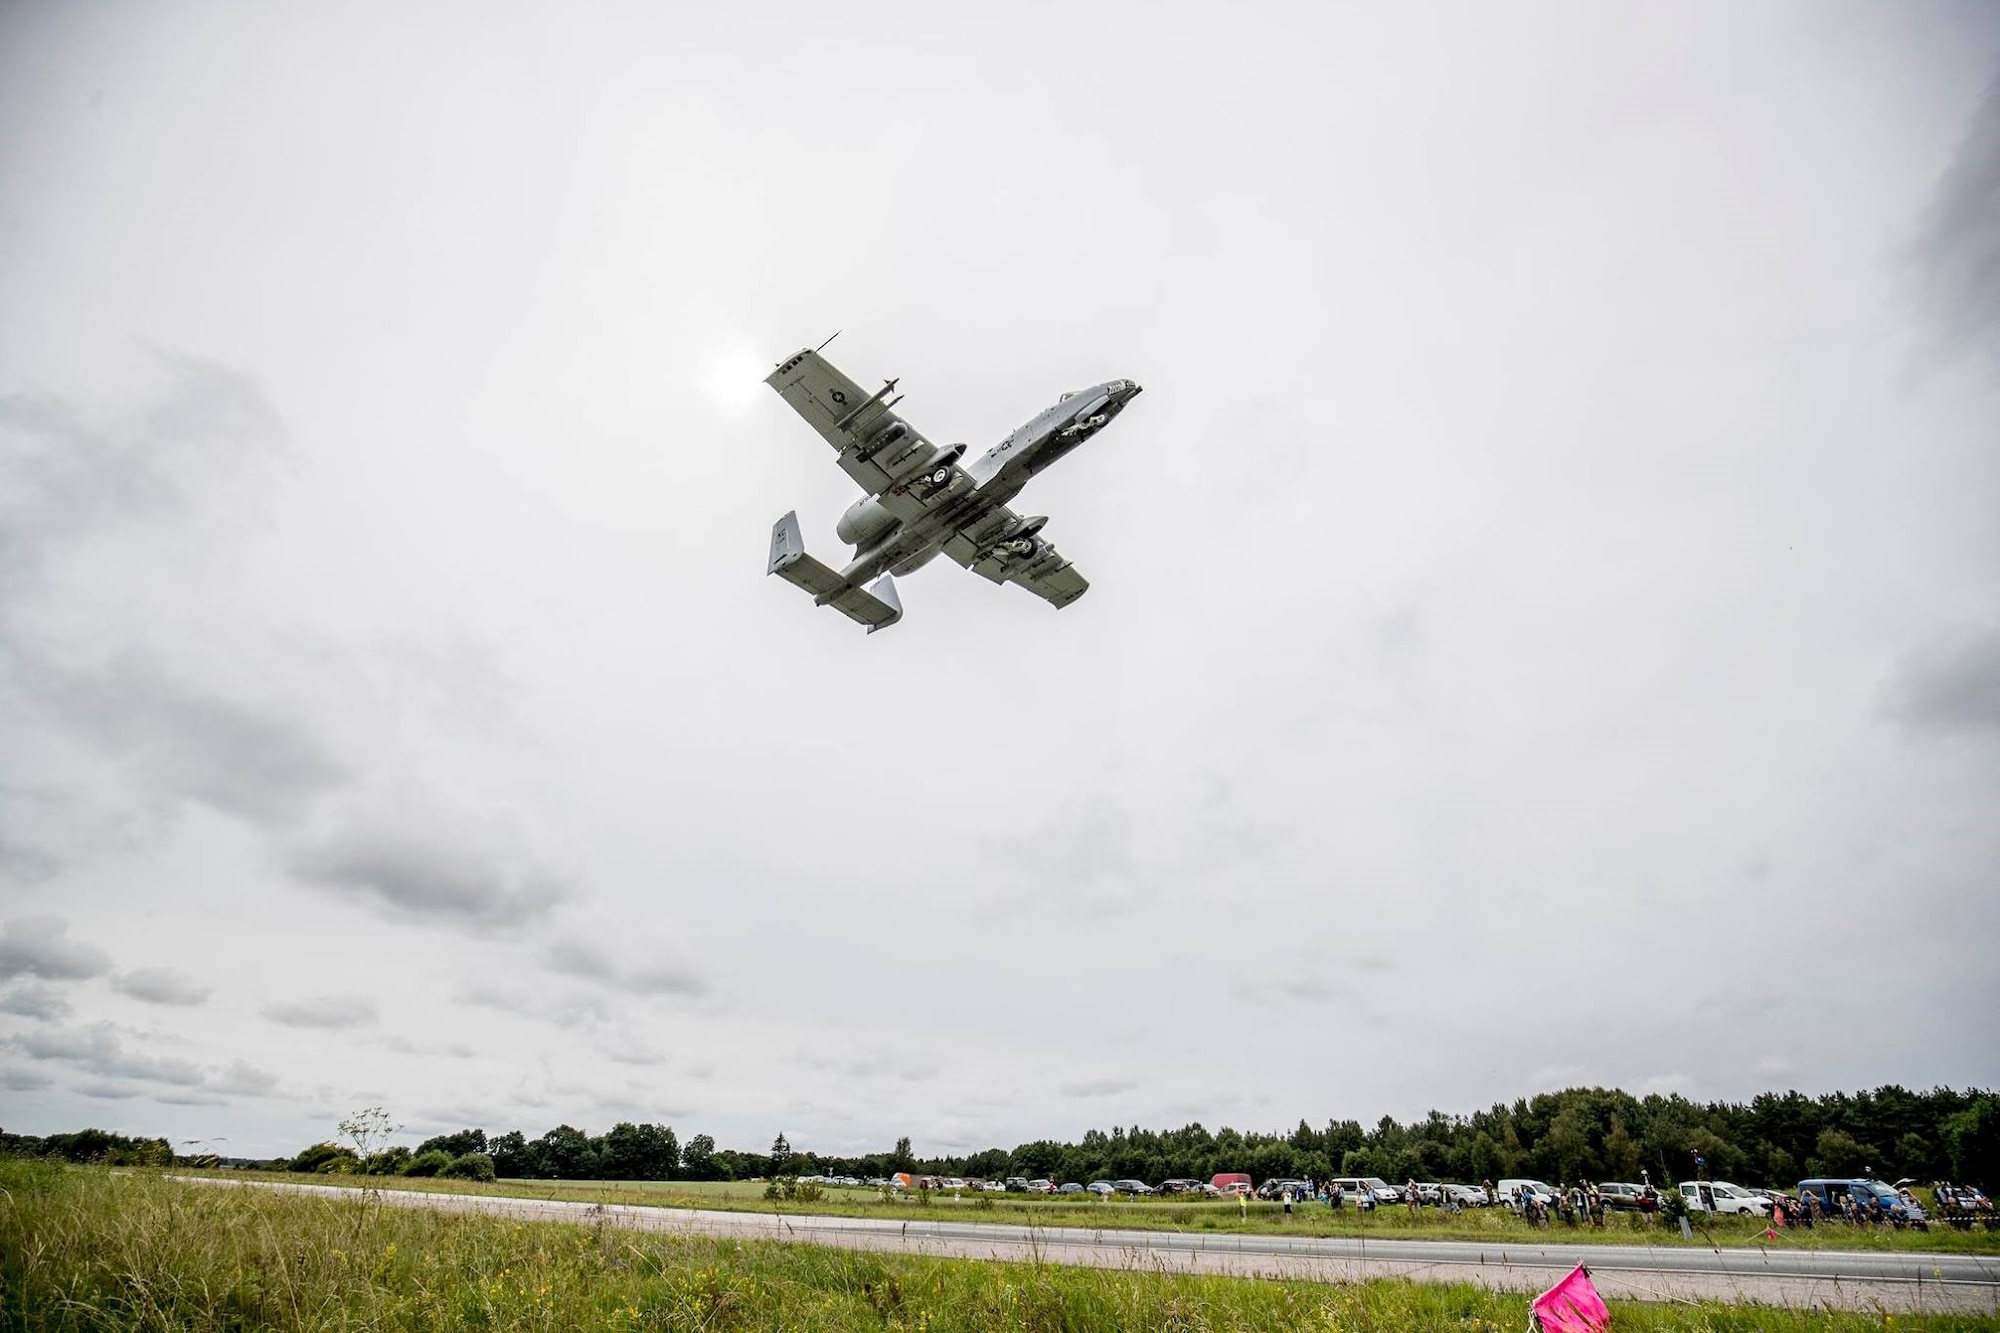 Eight United States Air Force Reserve Command A-10s assigned to the 442nd Fighter Wing, Whiteman Air Force Base, Missouri, conducted highway landings on the Jägala-Käravete Highway in Northern Estonia, Aug 1. Eight successful landings and take-offs from the highway not only displays the U.S. Air Force’s tactical capabilities, it also displays the partnership between the U.S. and Estonia that allowed for the coordination of the event. (Courtesy photo/ Andres Putting)